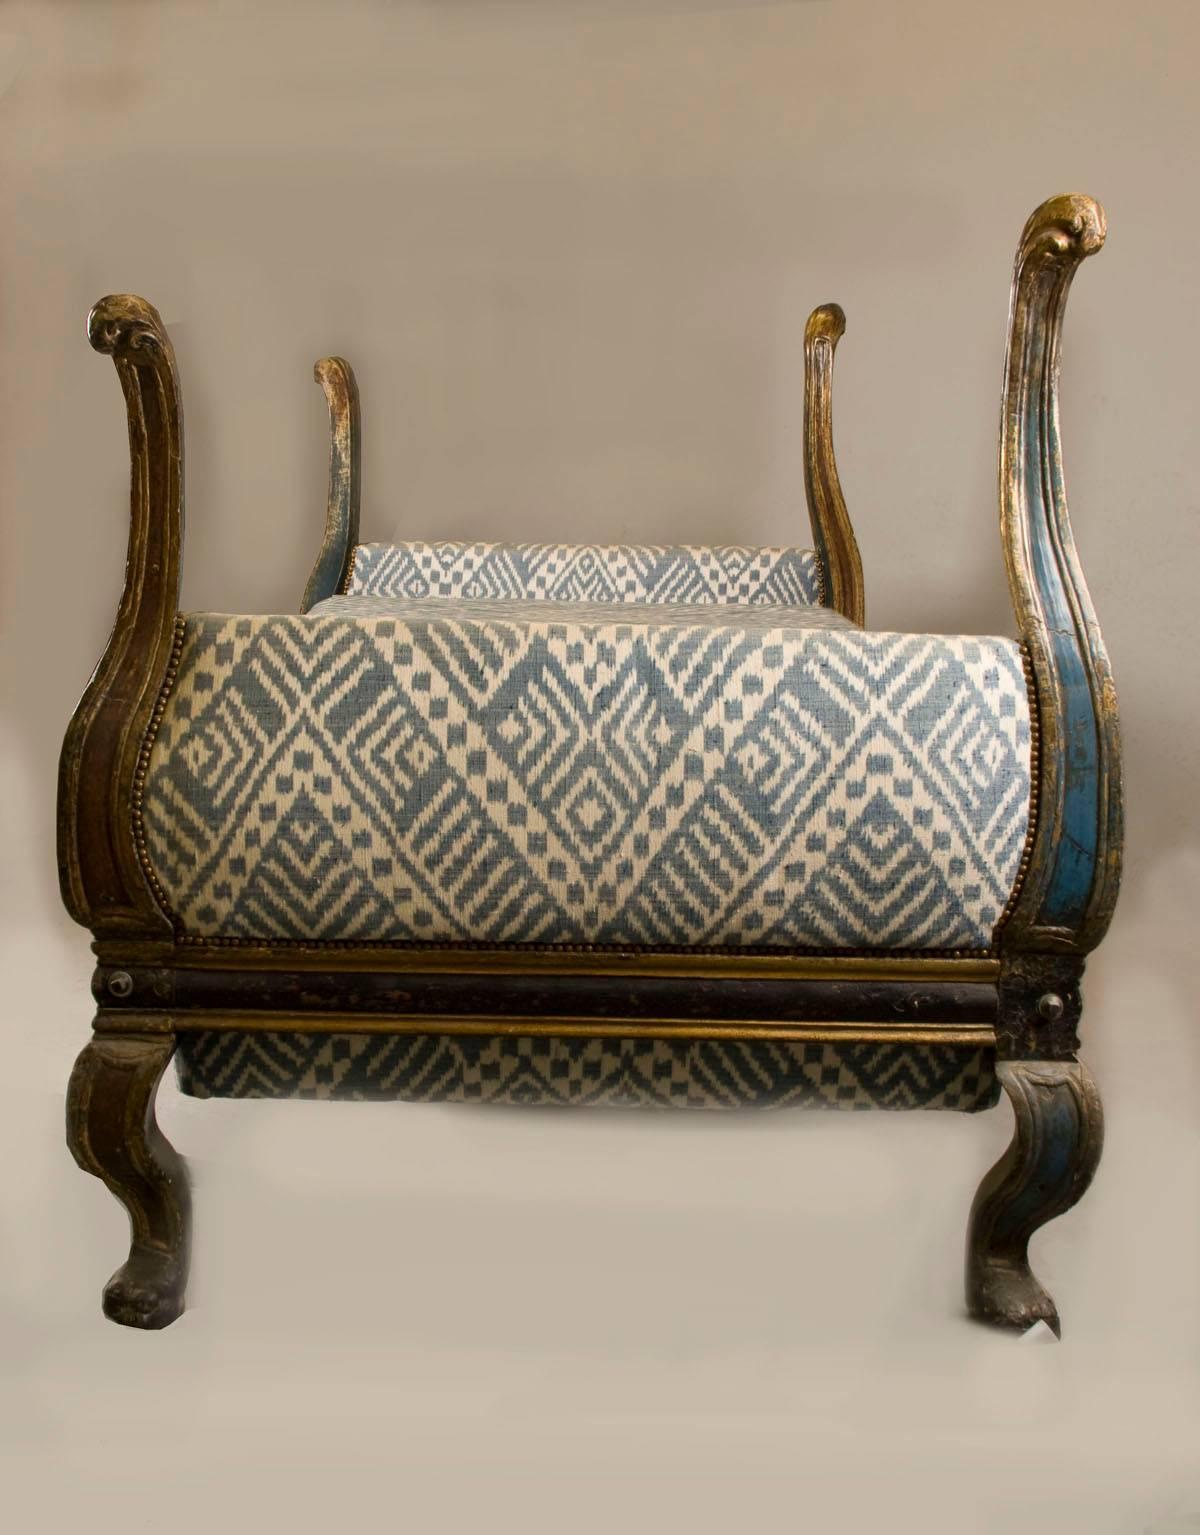 Late 19th Century 19th Century Venetian Daybed, Painted and Gilded